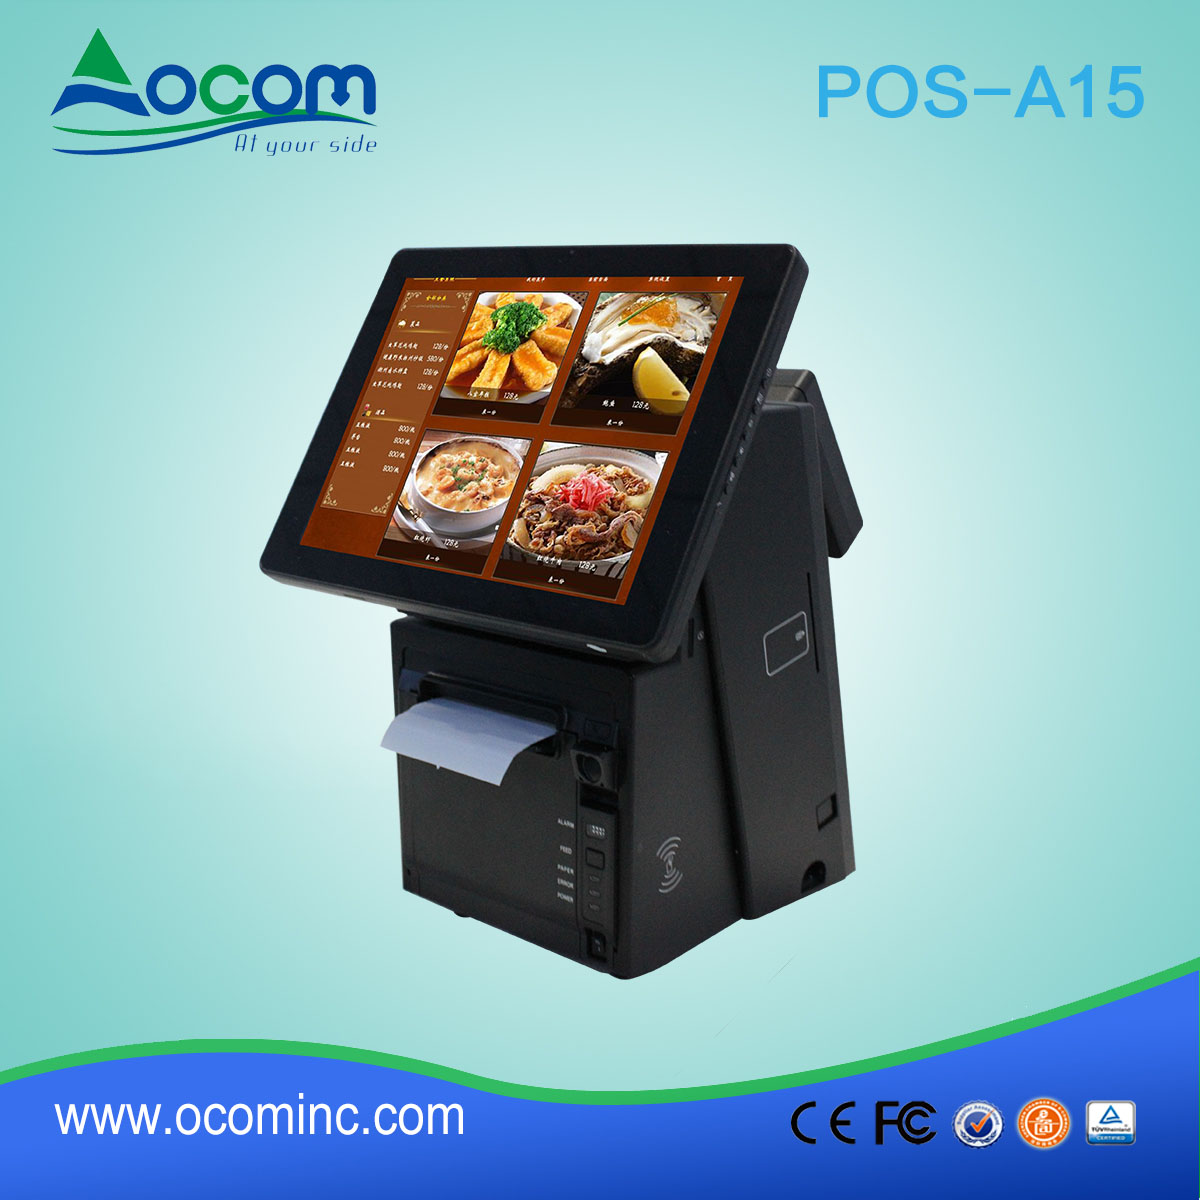 15.6" white or black all in one touch restaurant windows pos computer with optional Android OS